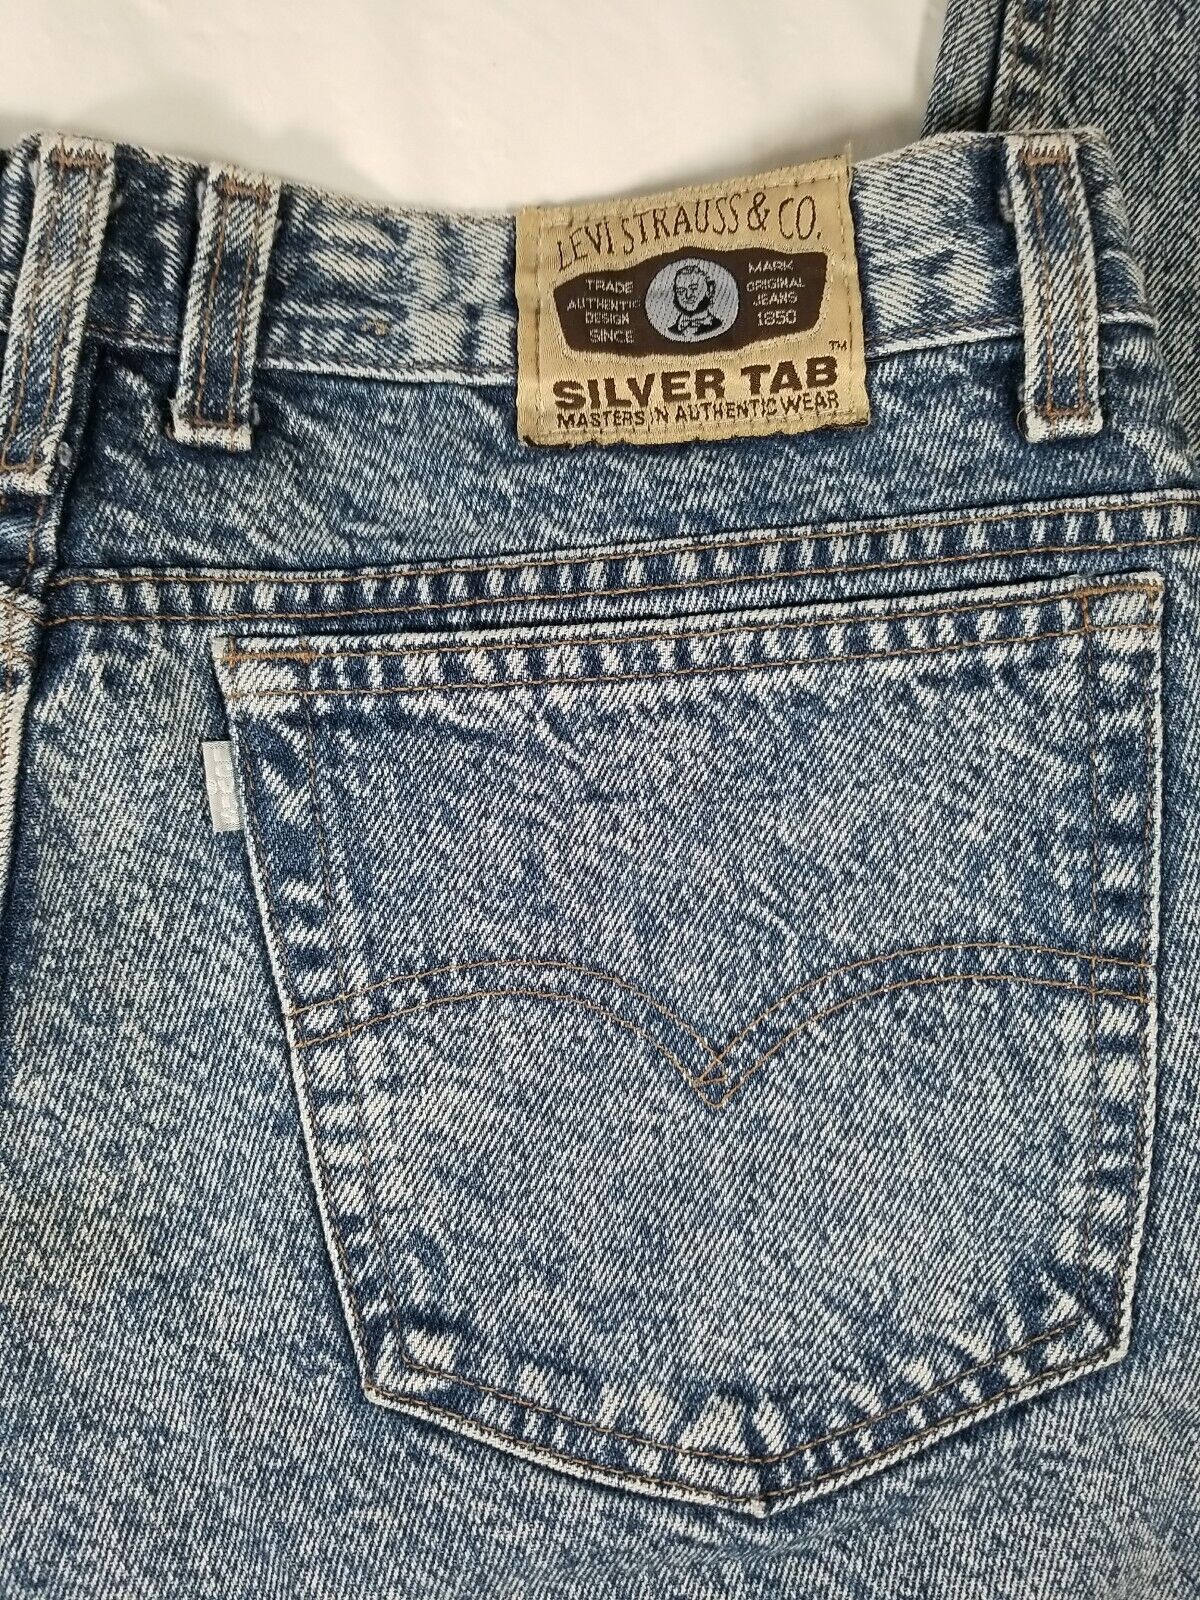 Timeless Threads: What do Levi’s Tabs Really Mean? – BELLO Mag